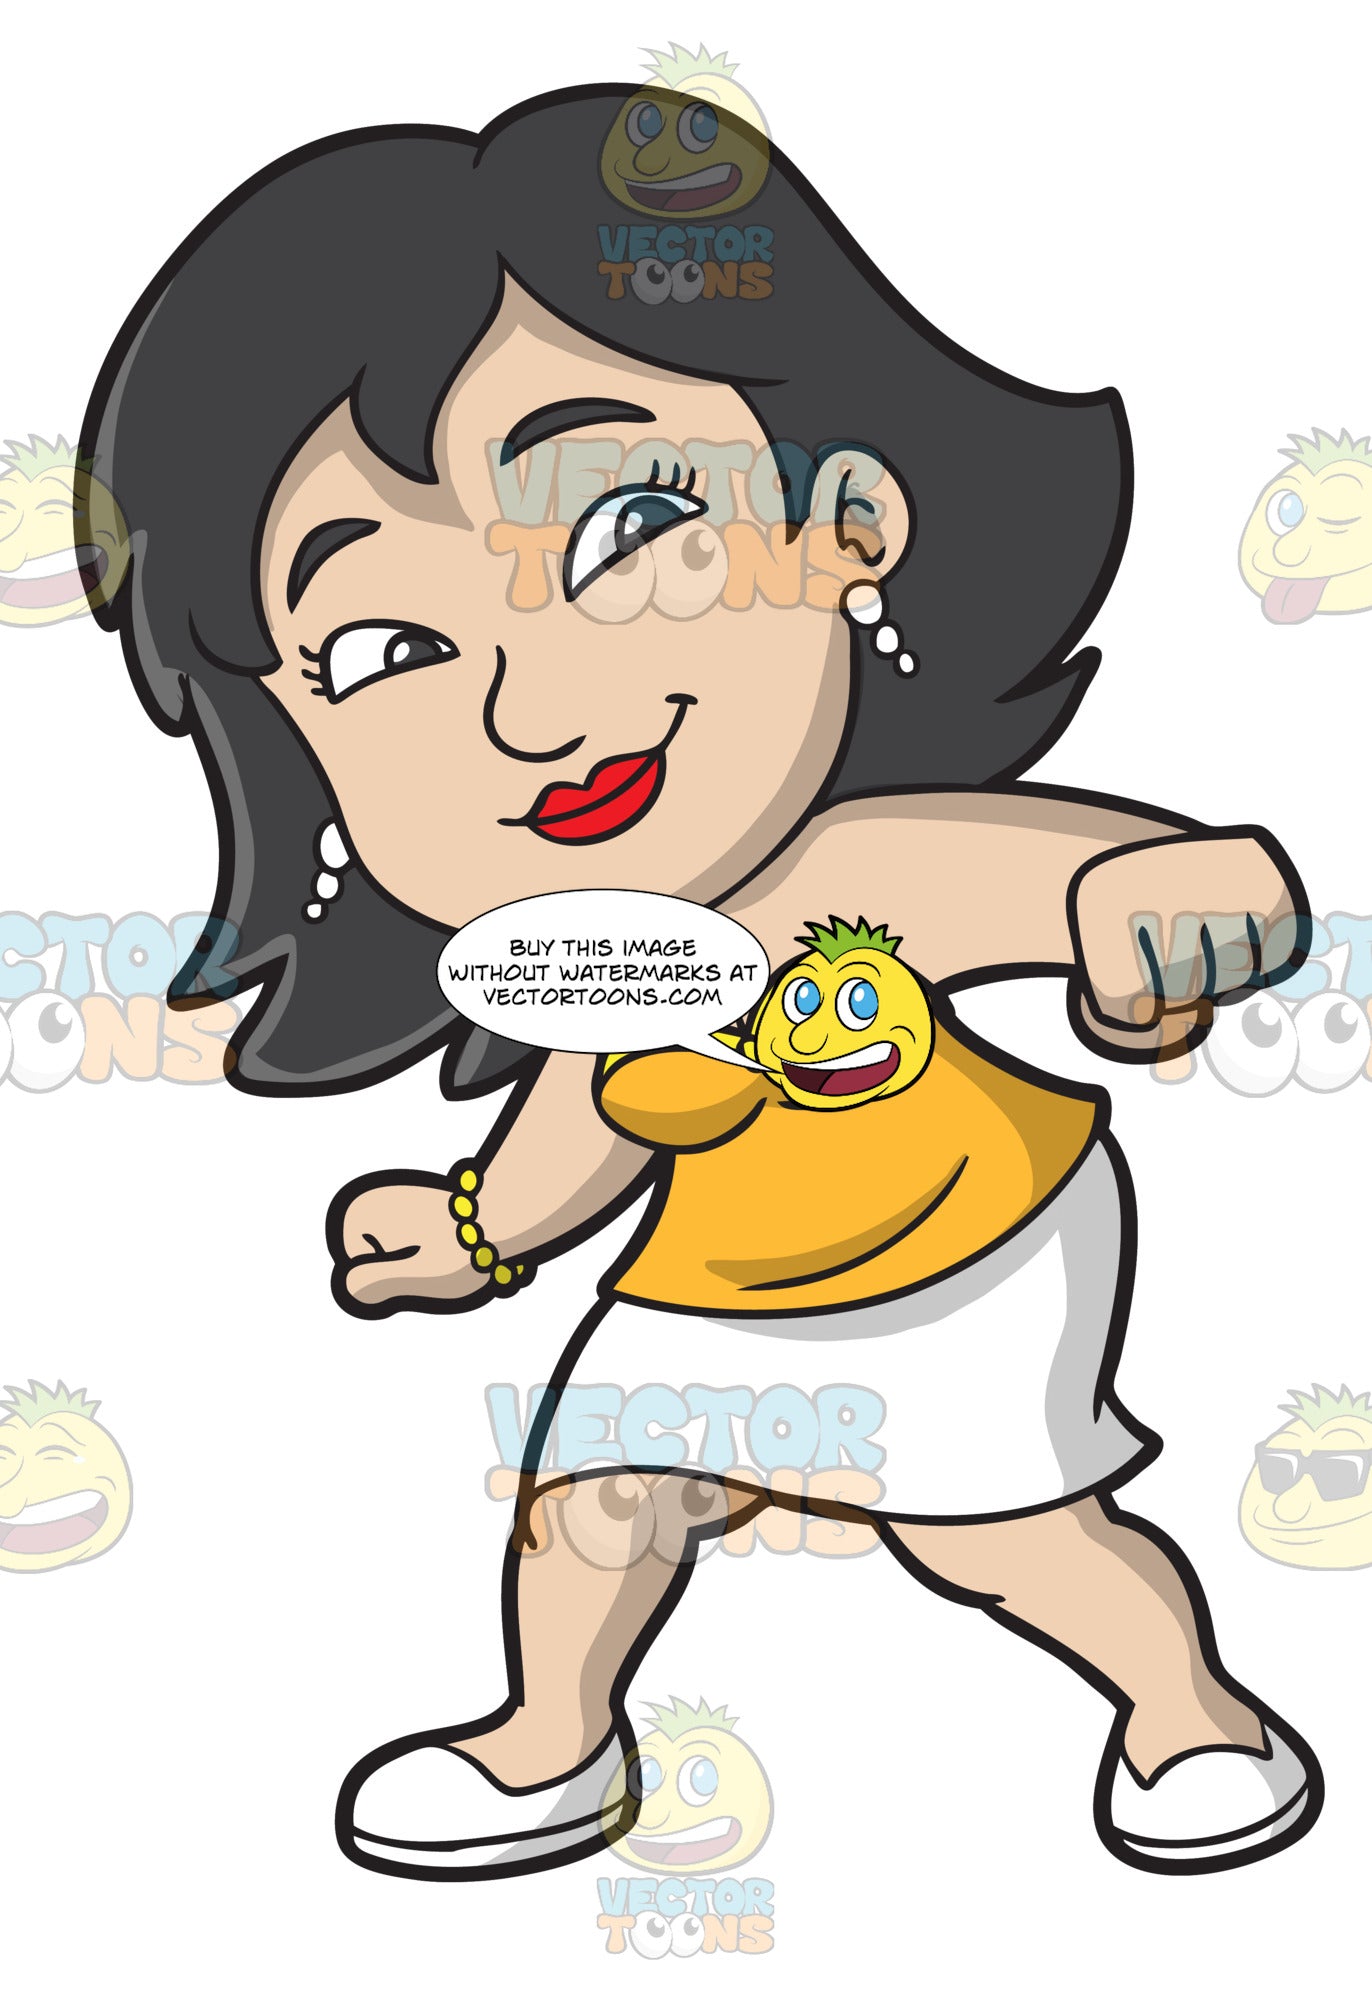 An Asian Woman Dancing To Whip Nae Nae Clipart Cartoons By Vectortoons Cartoon sound fx whip boomerang whoosh multiple. an asian woman dancing to whip nae nae clipart cartoons by vectortoons